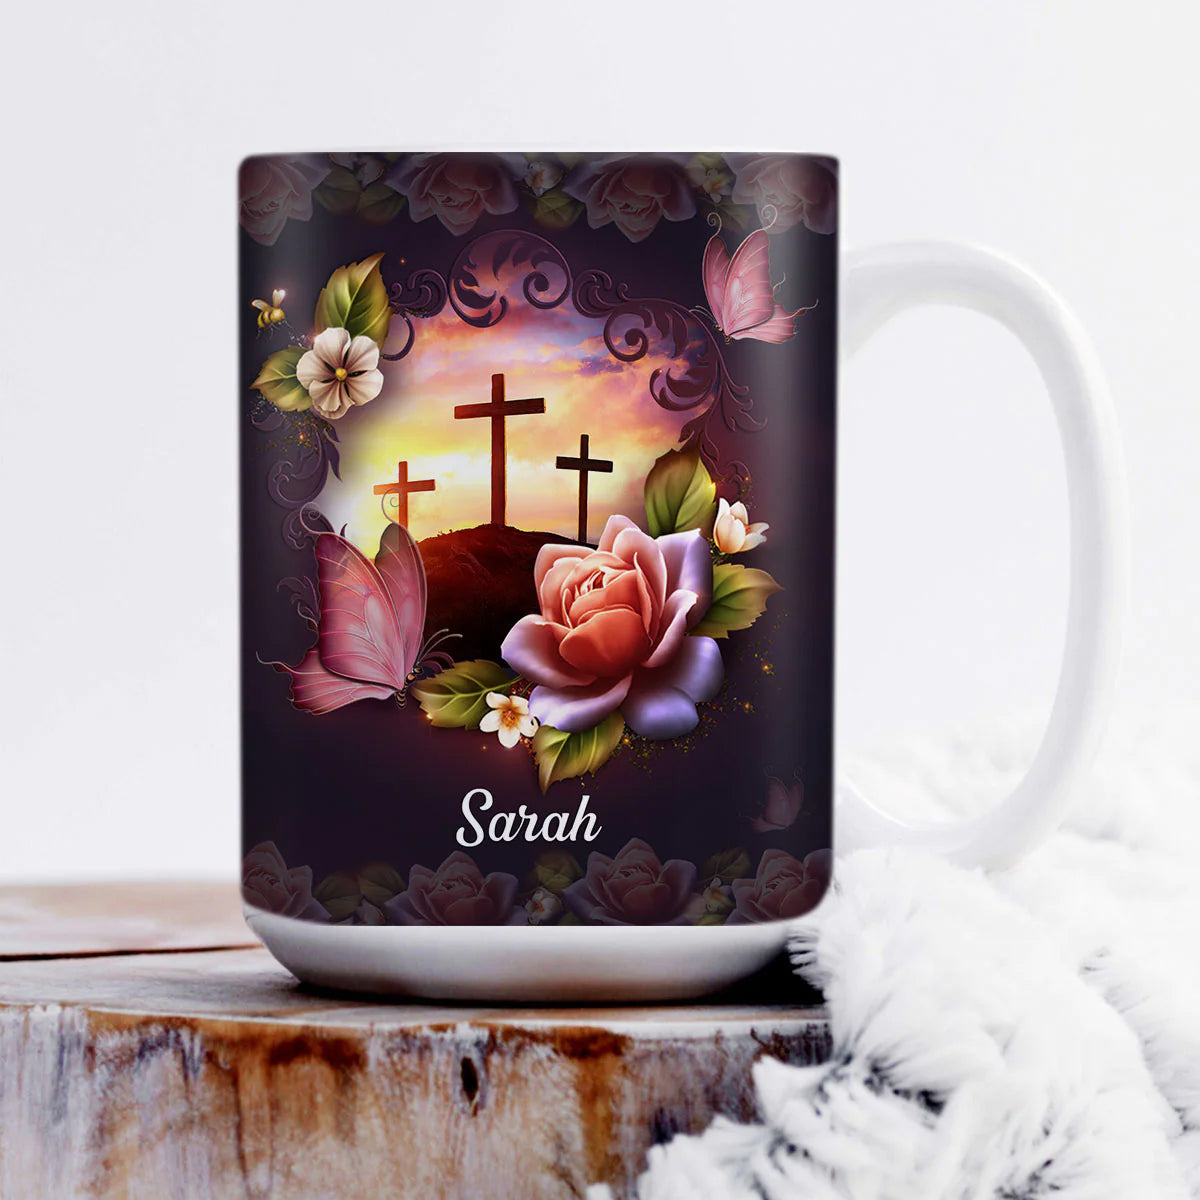 Christianartbag Drinkware, Thank You Lord For Making Me Whole, Personalized Mug, Tumbler, Personalized Gift. - Christian Art Bag